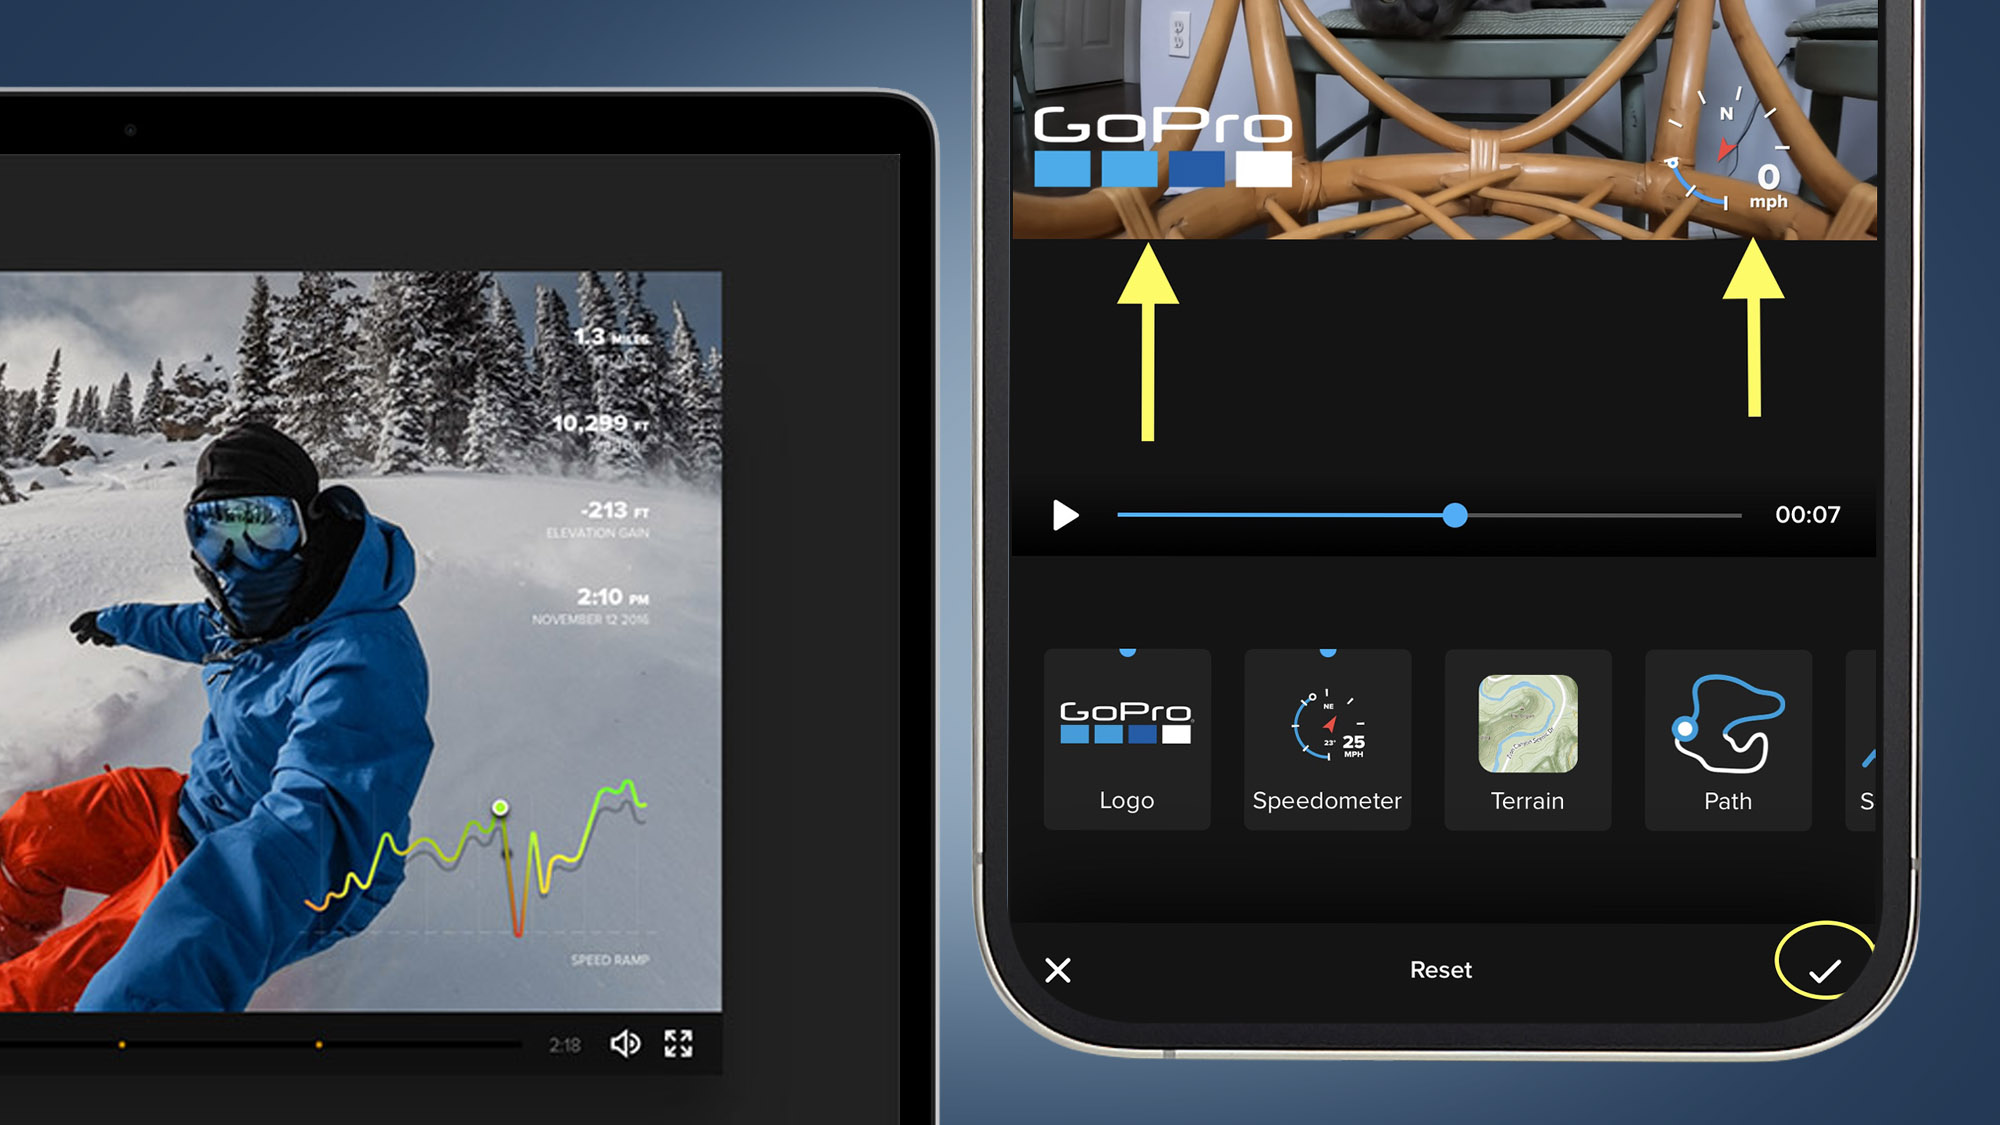 The GoPro Quik app on mobile and desktop